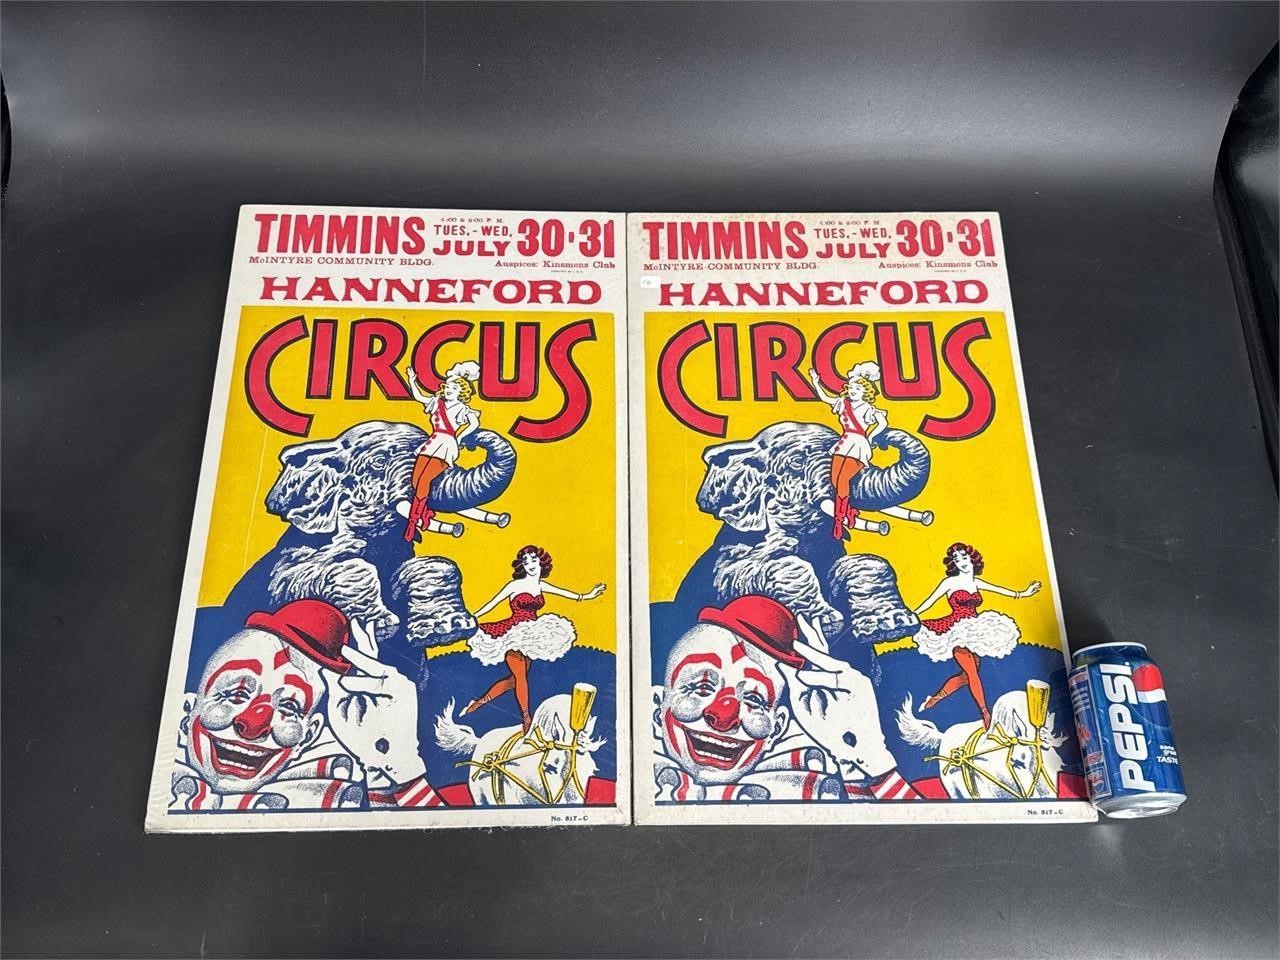 LOT OF 2 HANNEFORD CIRCUS POSTERS SHRINK WRAPPED